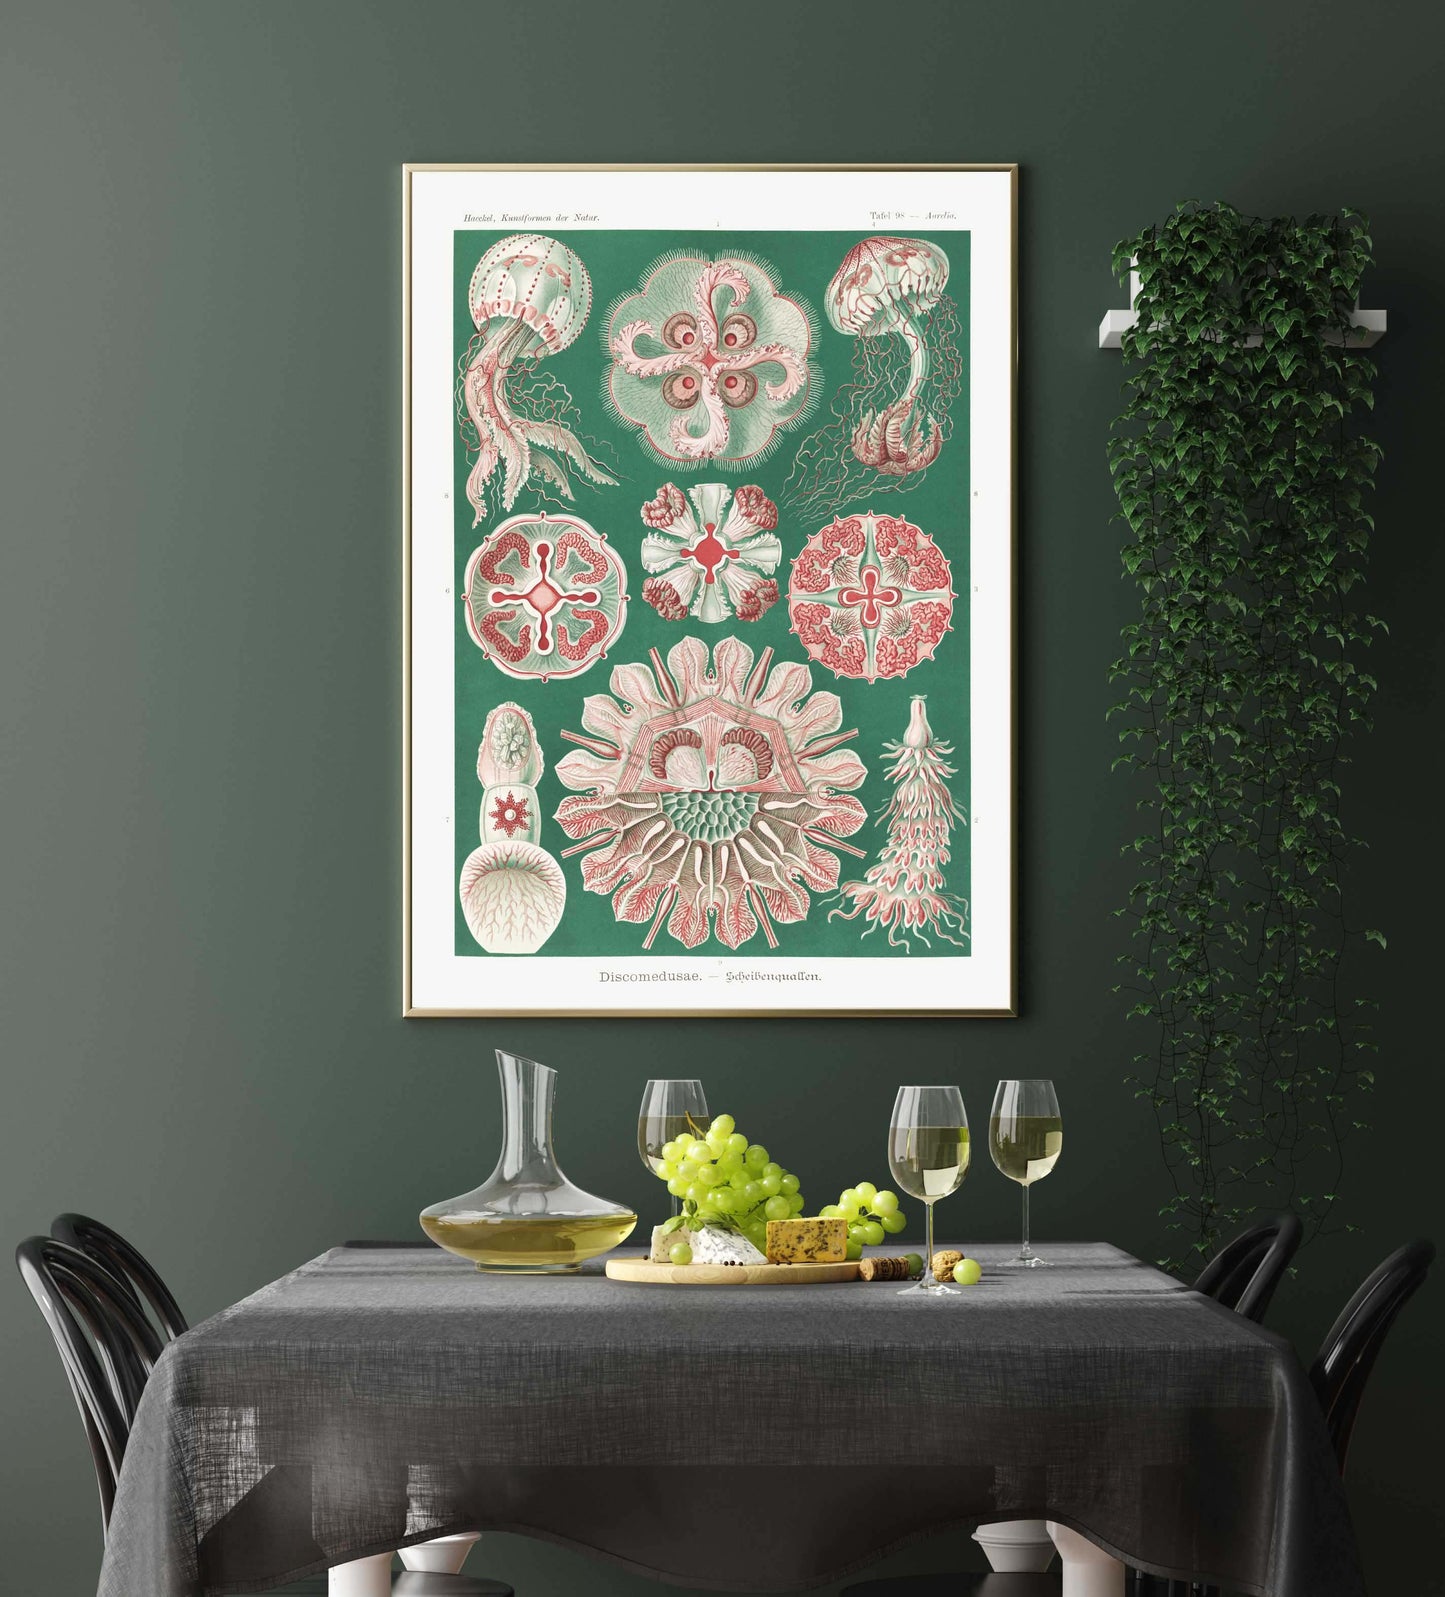 Ernst Haeckel Wall Art - Discomedusae Green Pink by Ernst Haeckel Poster with borders